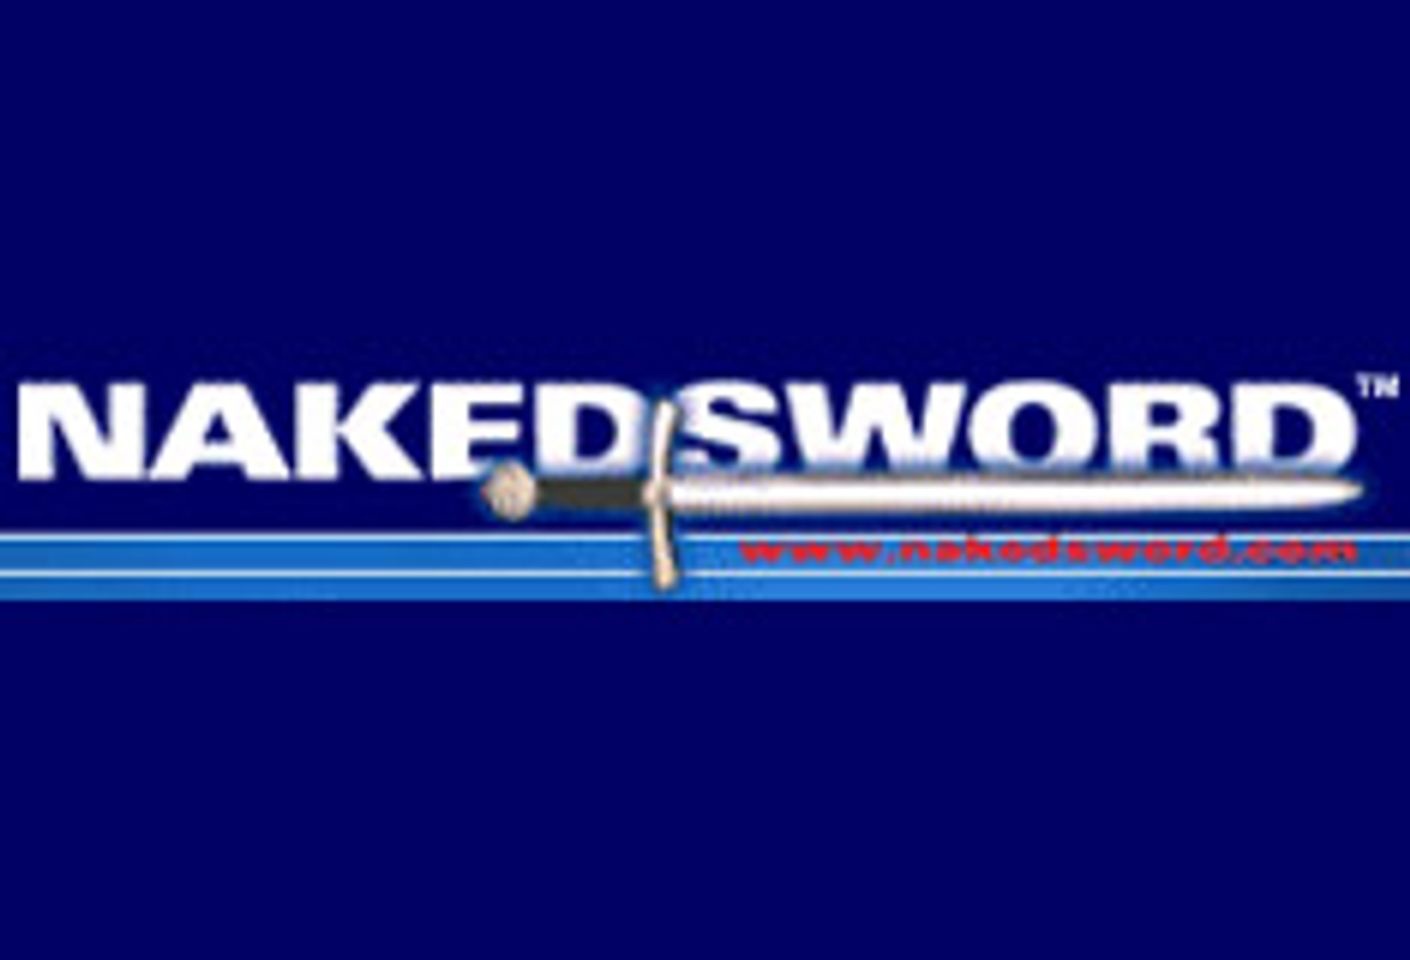 NakedSword.com Searches For "Wet Palms" Lead